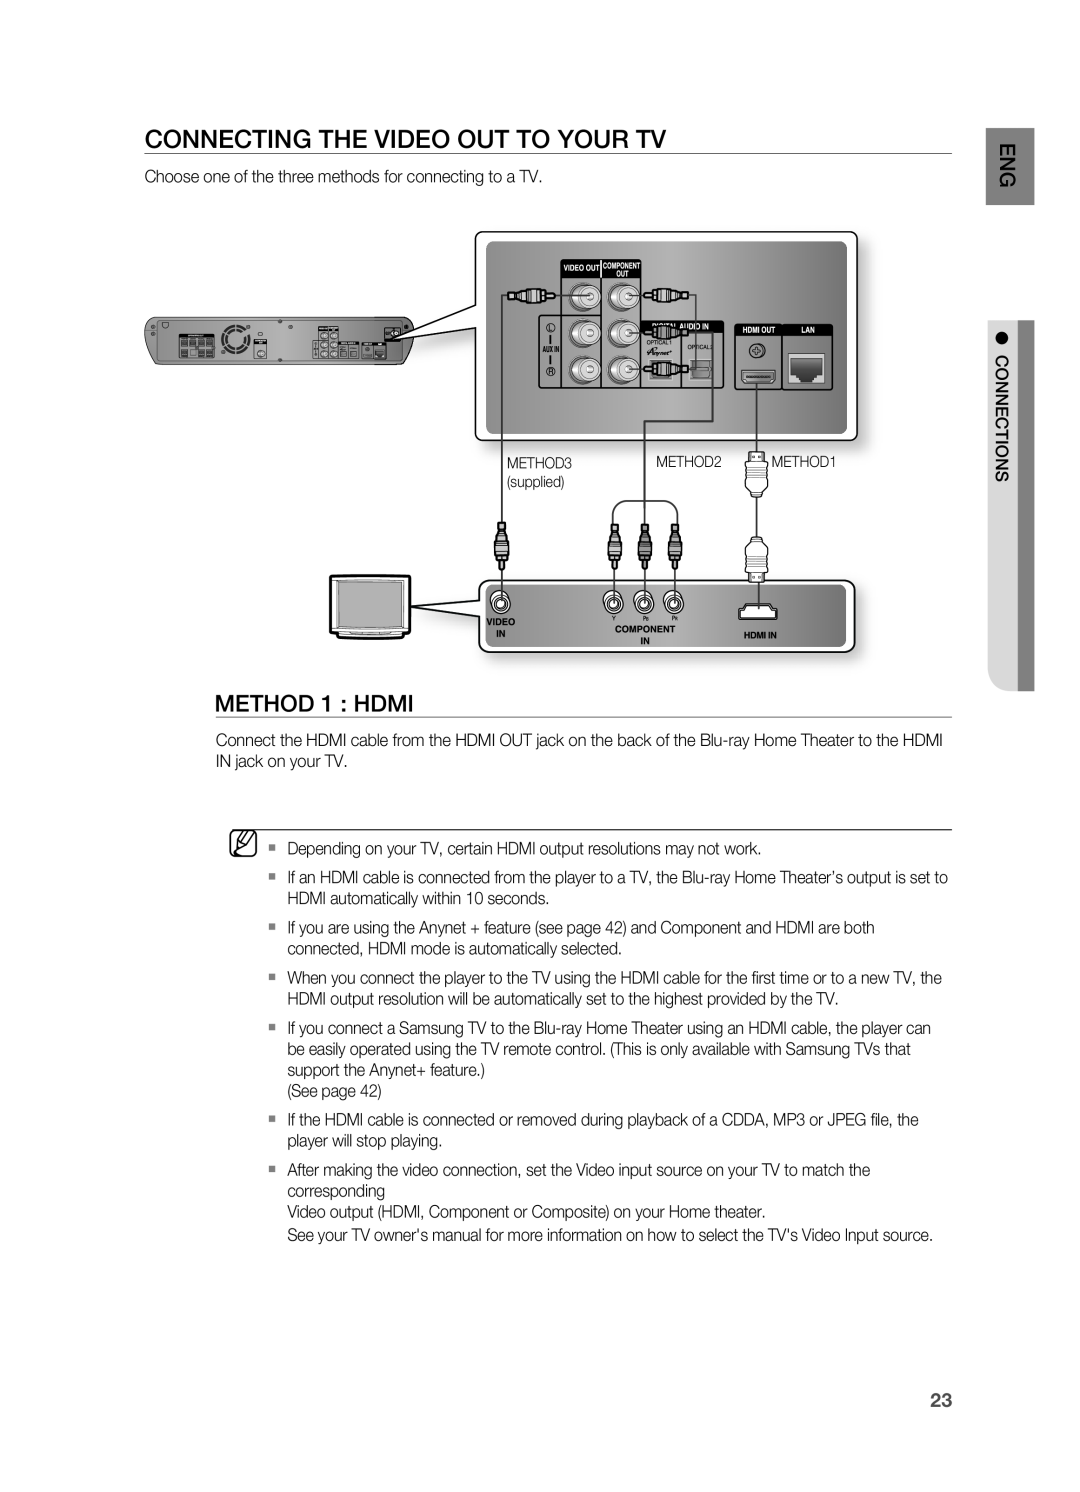 Samsung HT-BD2S manual Connecting the Video Out to your TV, METHOD 1 : HDMI 